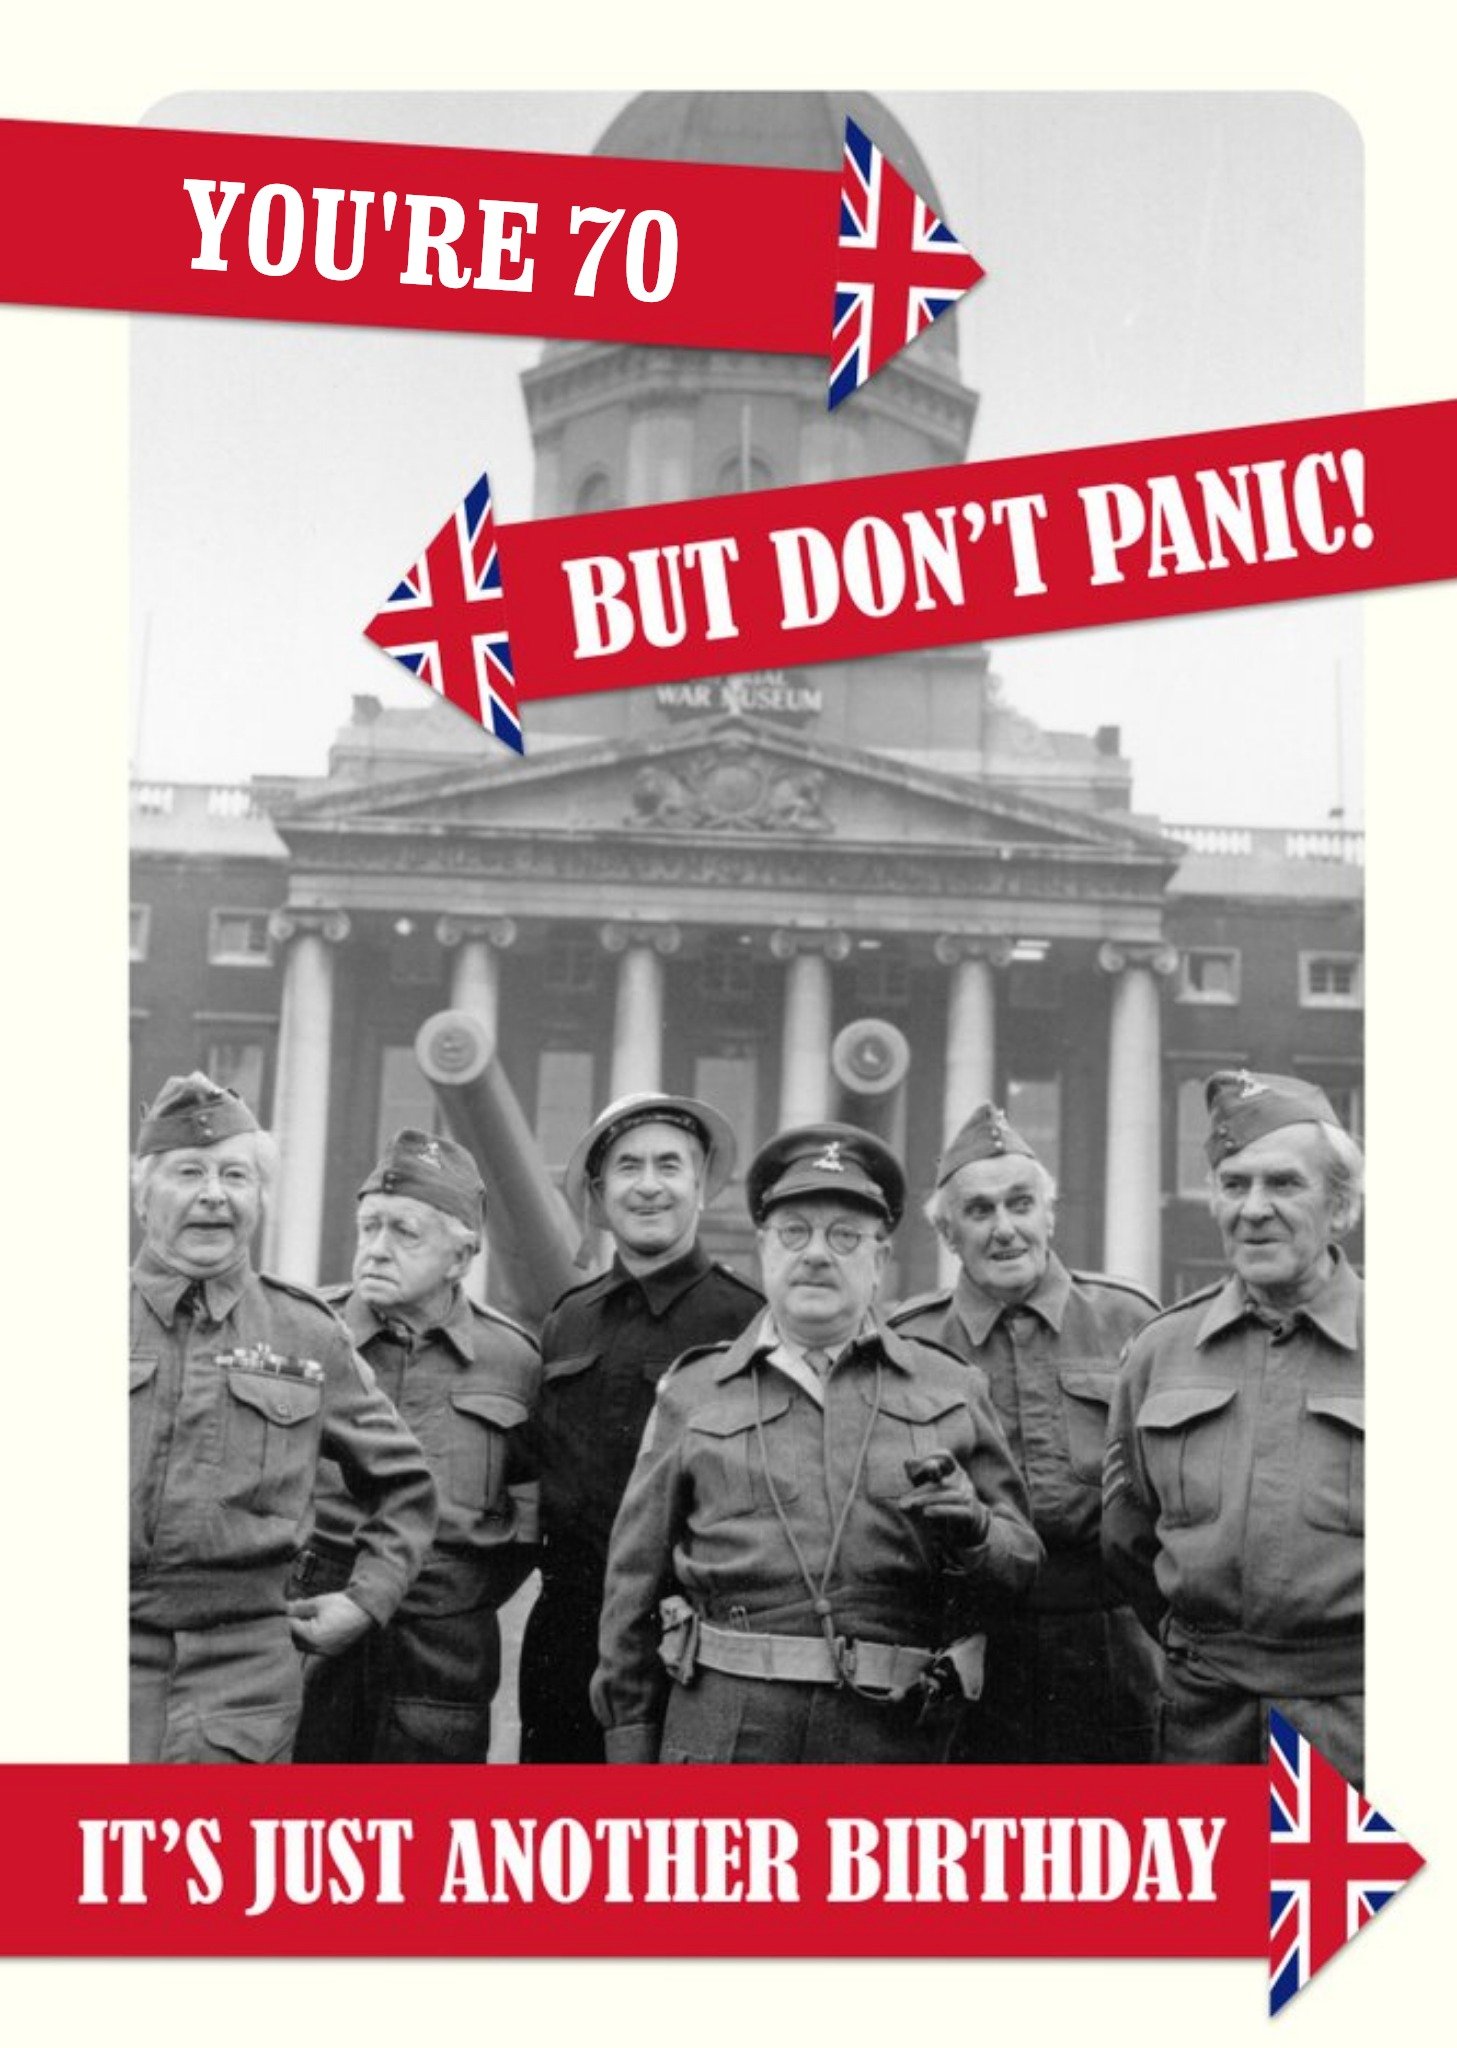 Retro Humour Dad's Army Don't Panic 70th Birthday Card, Large